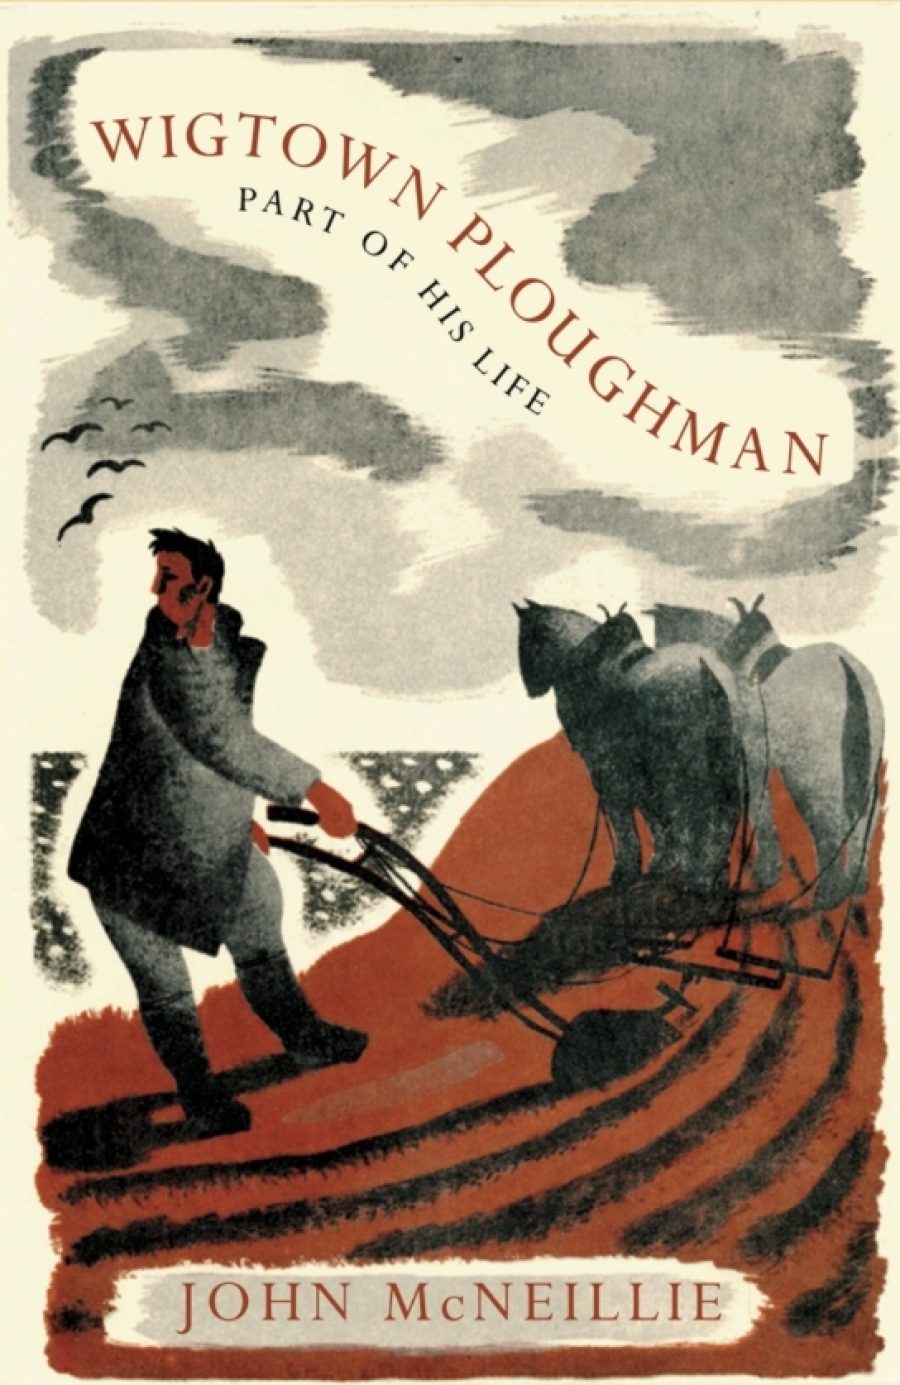 Book cover of 'Wigtown Ploughman' by John McNeillie. Illustration of a person ploughing a field using horses.